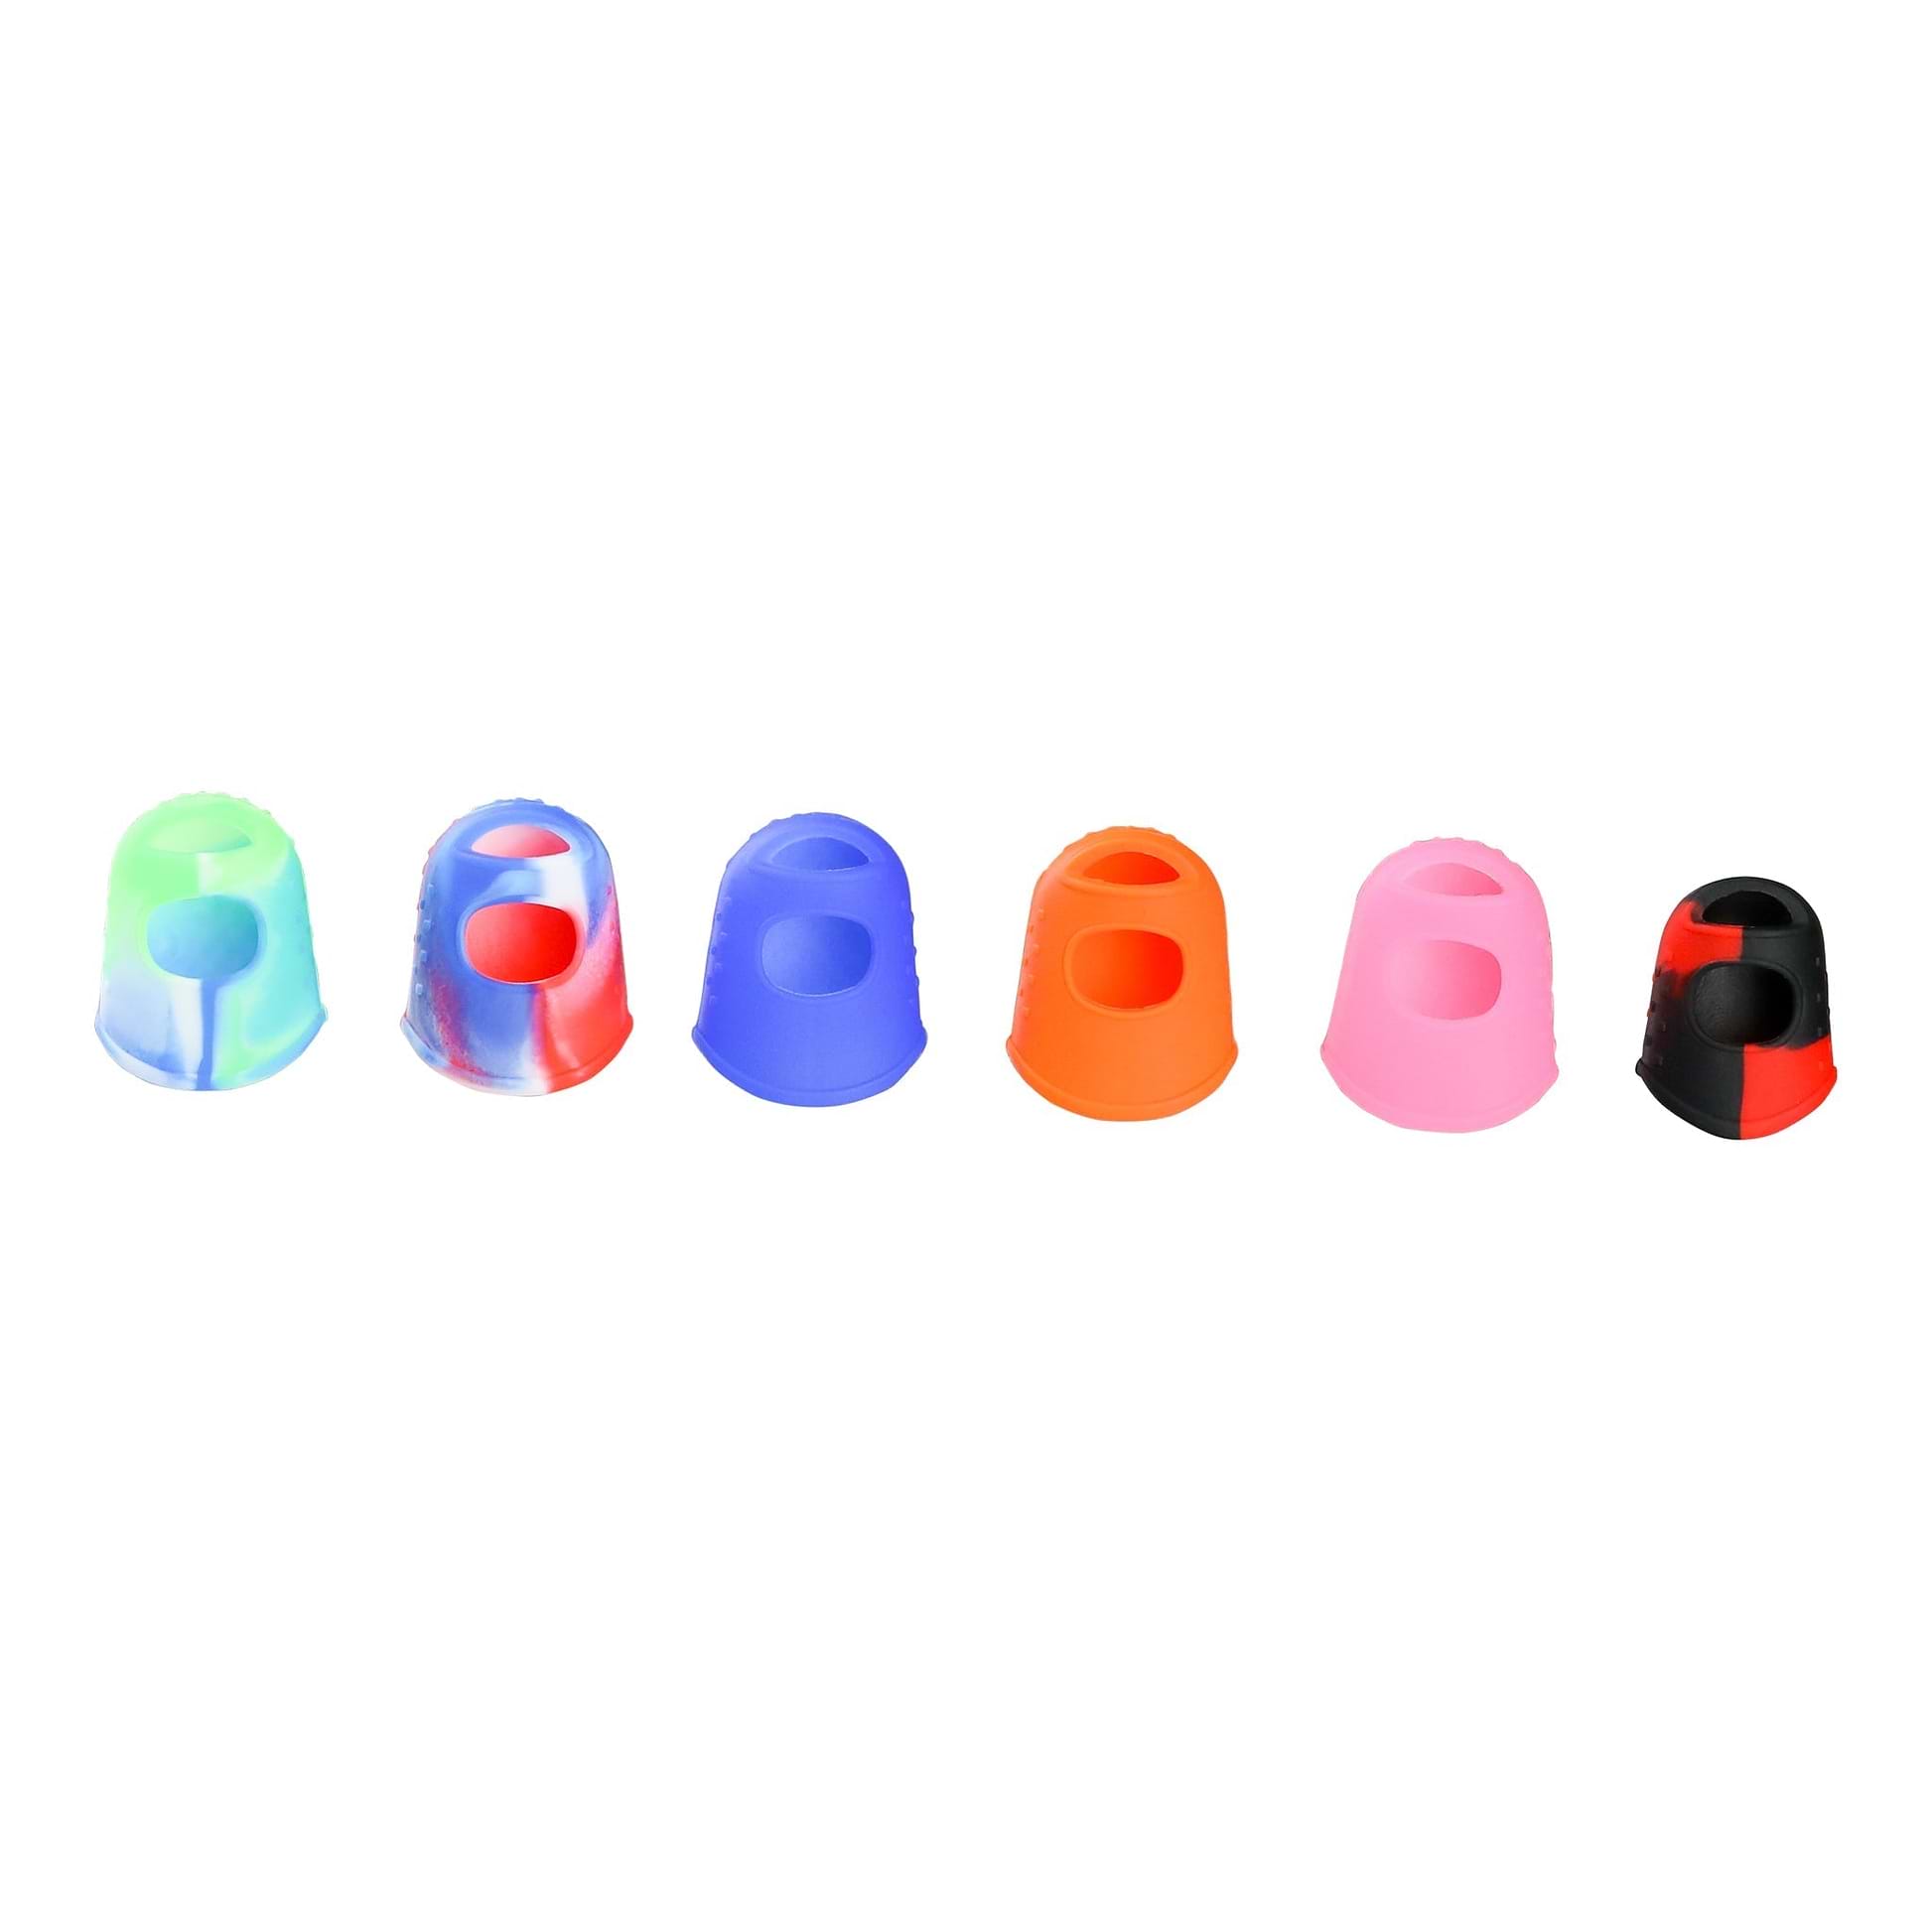 Silicone Finger Tips 